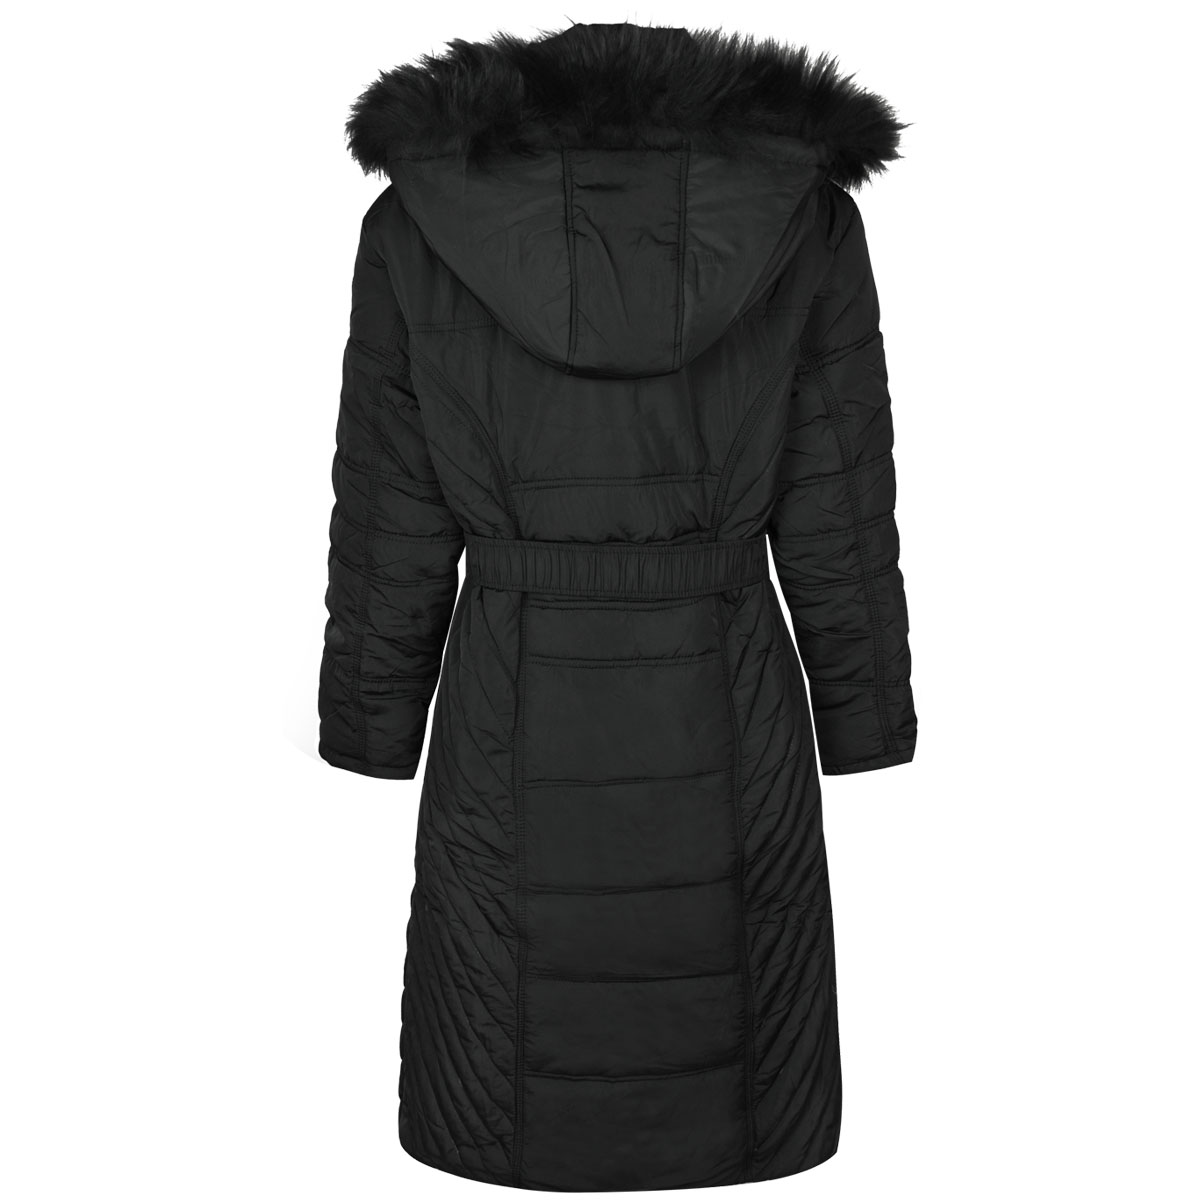 Womens Ladies Long Winter Coat Padded Quilted Puffa Jacket Fur Hooded Plus Size | eBay